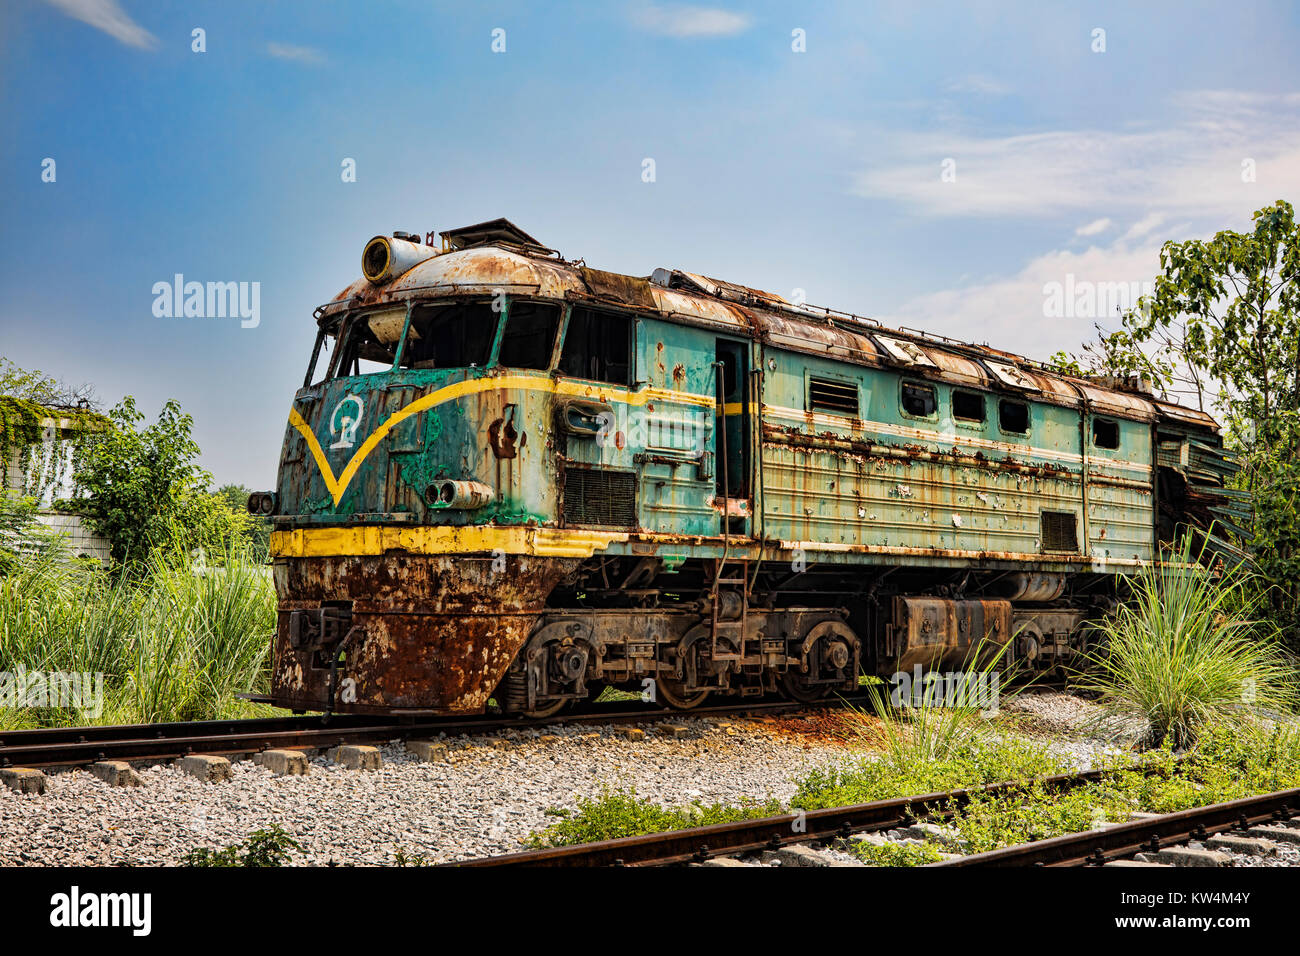 An old abandoned train locomotive at a railway station in Guilin, Guangxi Province, China Stock Photo